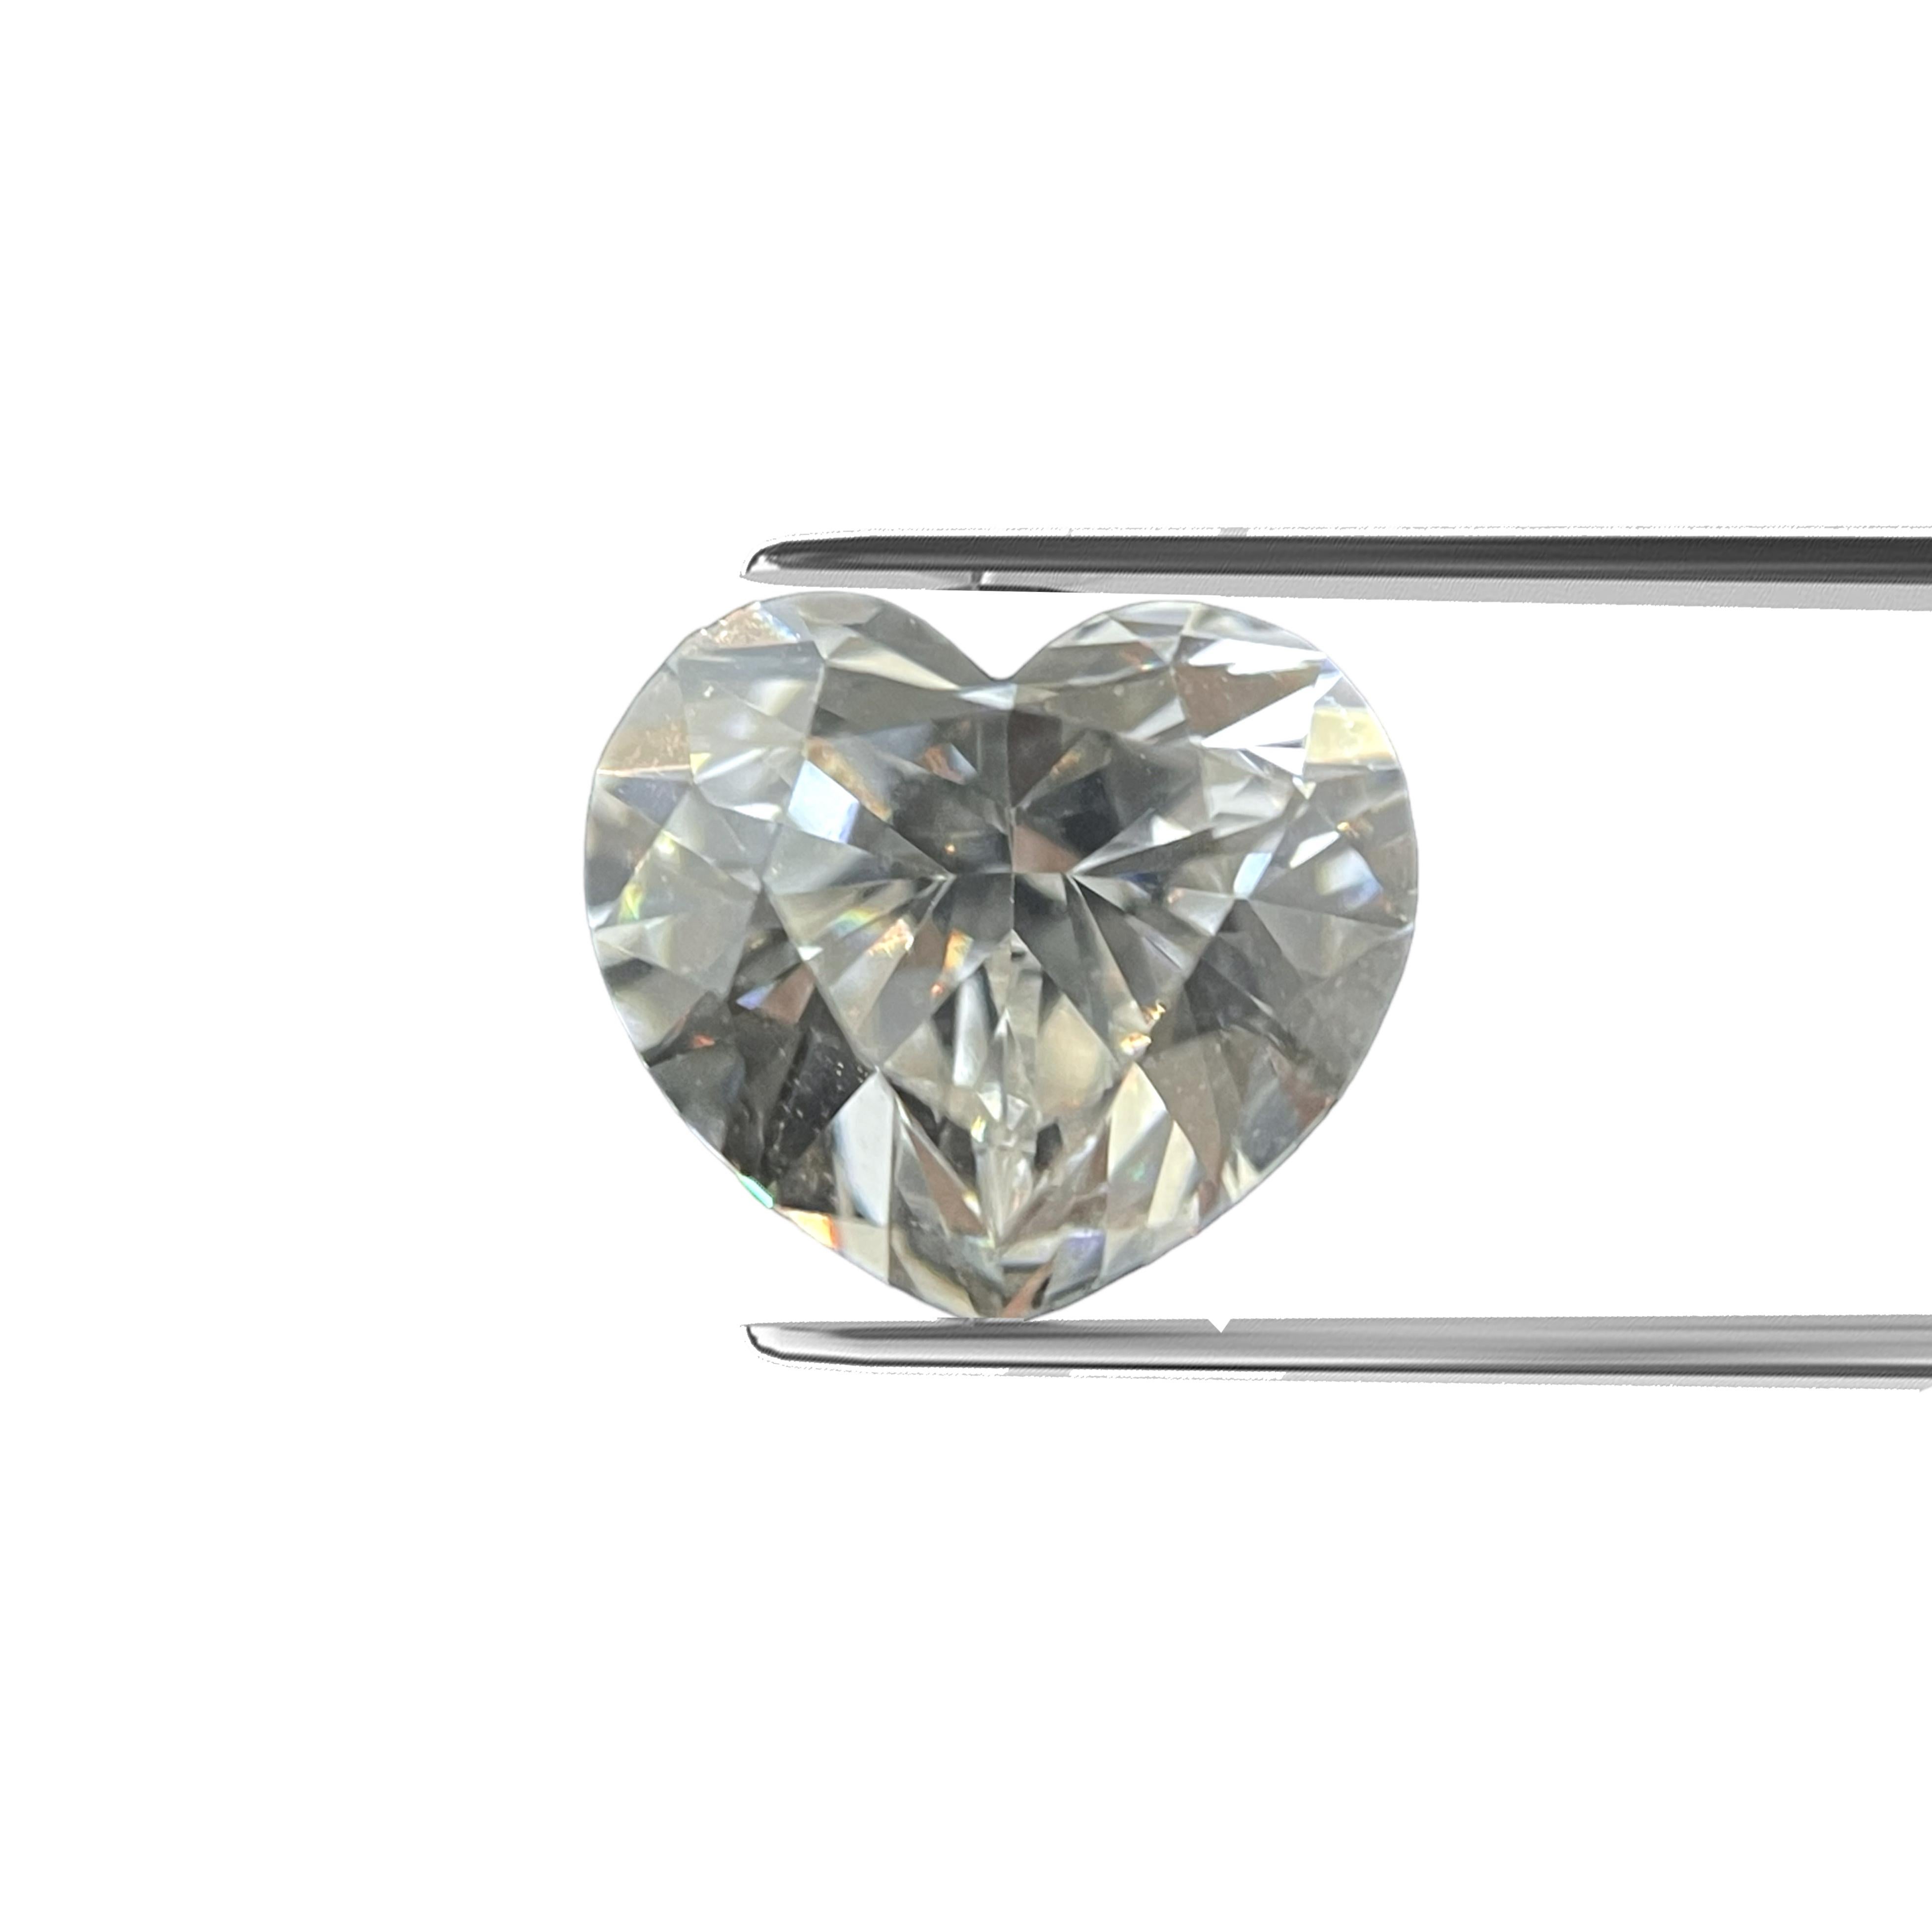 ITEM DESCRIPTION

ID #:	NYC56557
Stone Shape: HEART BRILLIANT
Diamond Weight: 0.90ct
Clarity: VS2
Color: H
Cut:	Excellent
Measurements: 5.74 x 6.47 x 3.91 mm
Depth%: 60.4%
Table%: 55%
Symmetry: Very Good
Polish: Good
Fluorescence: None
Certifying